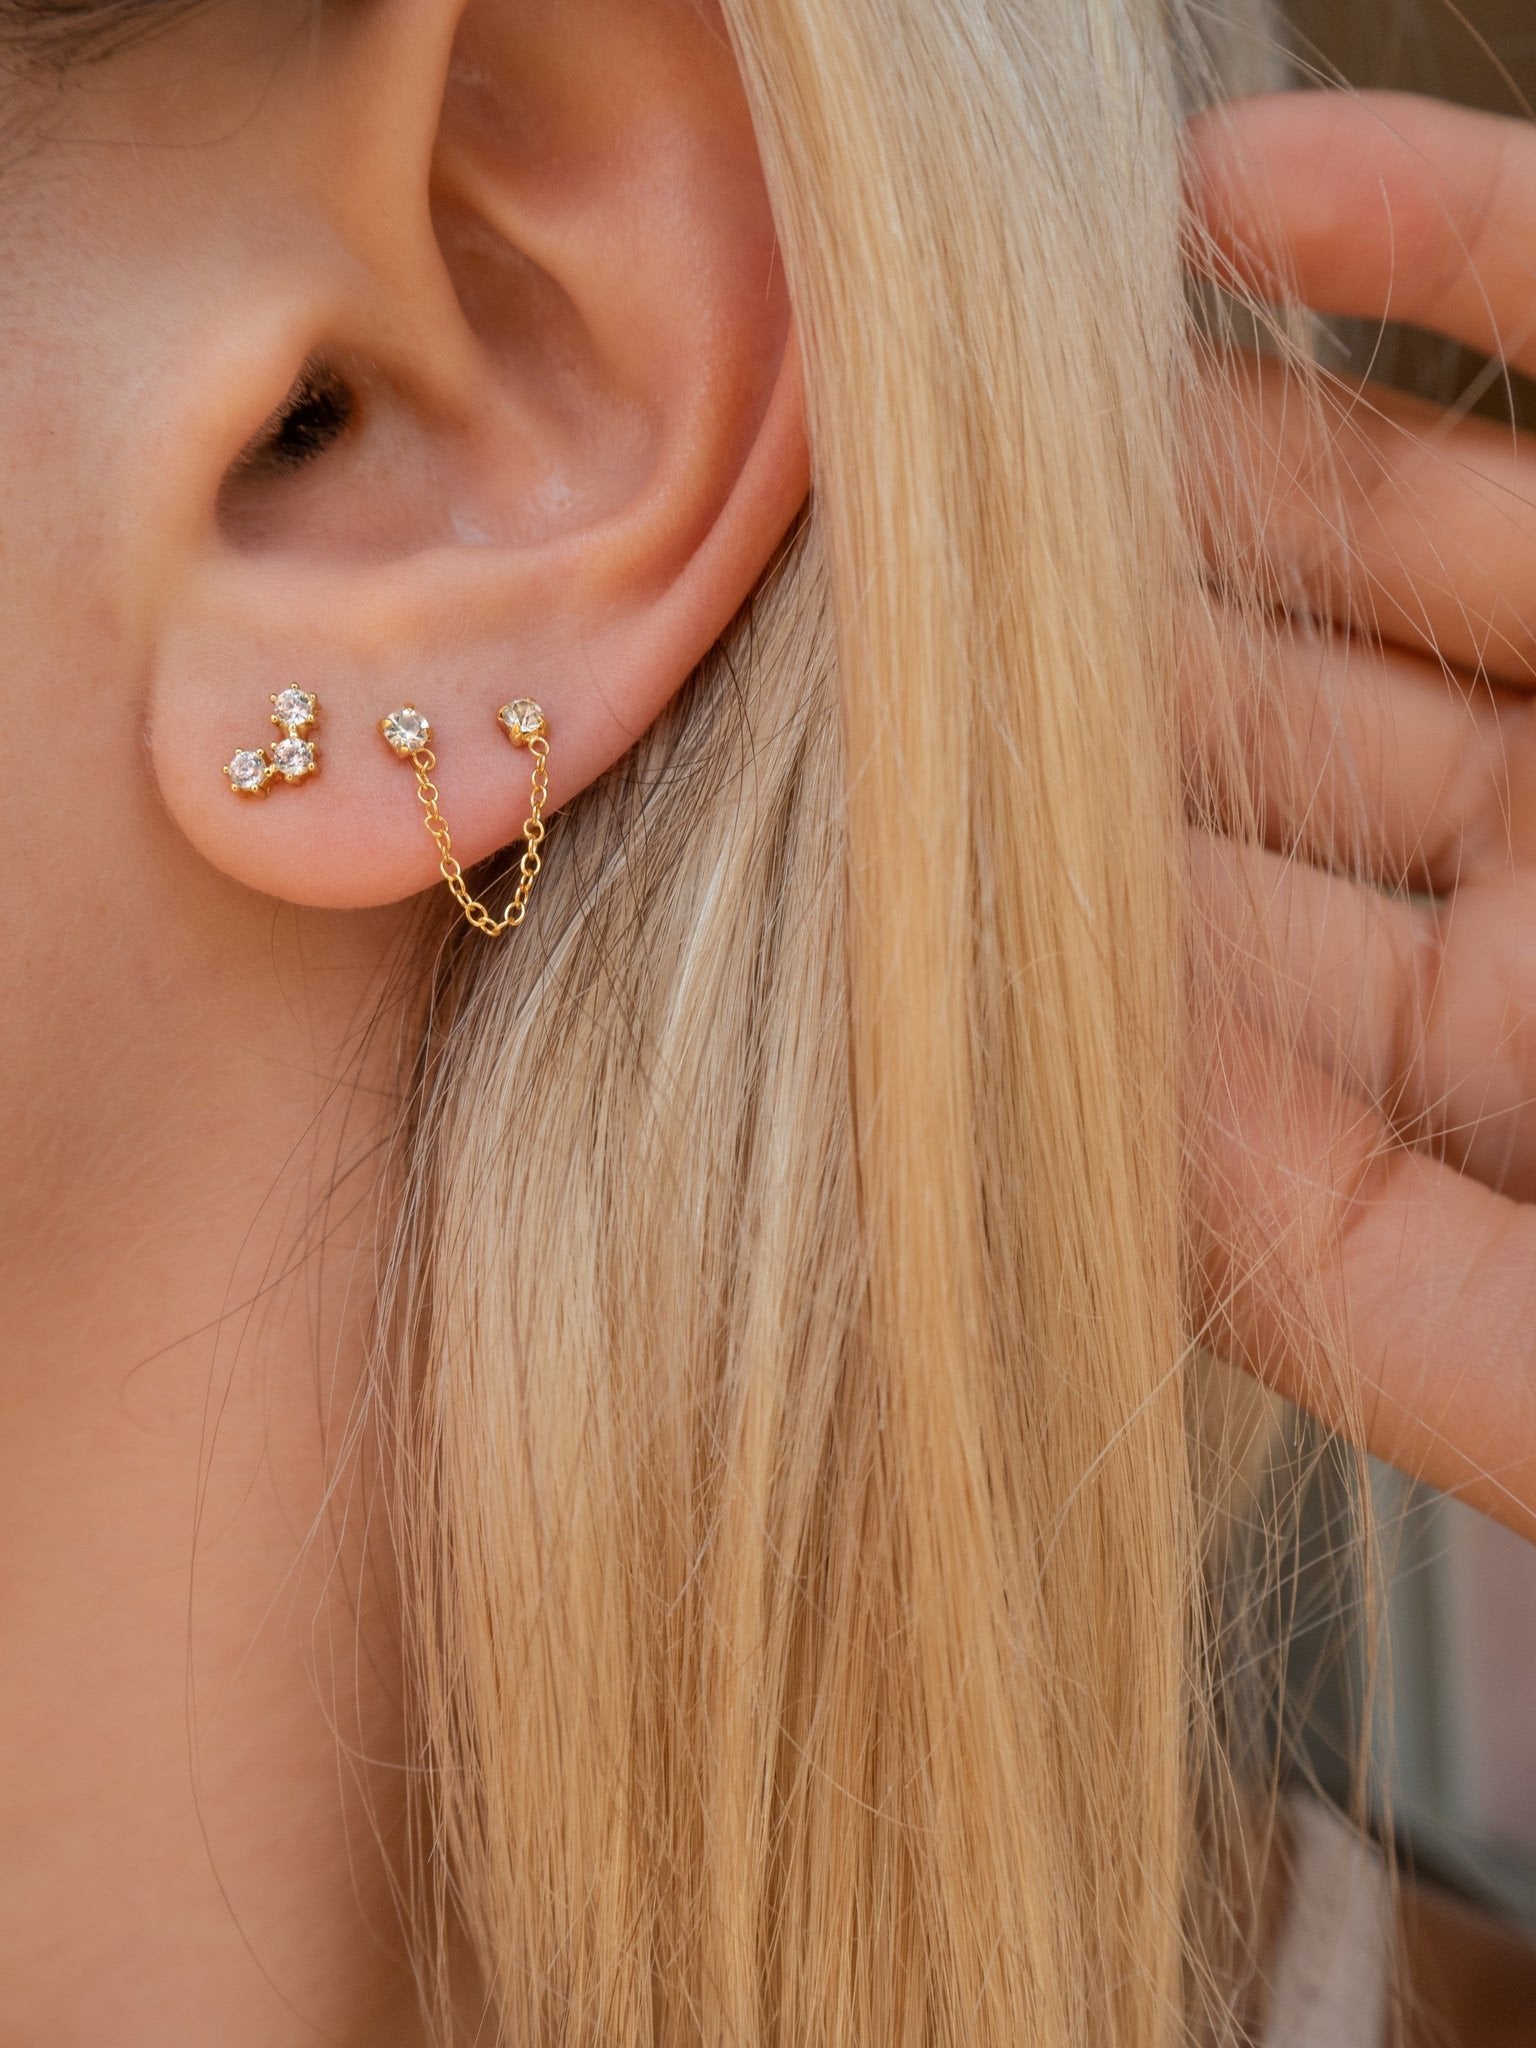 Piercing Studio for Ear and Nose Piercings | Claire's US